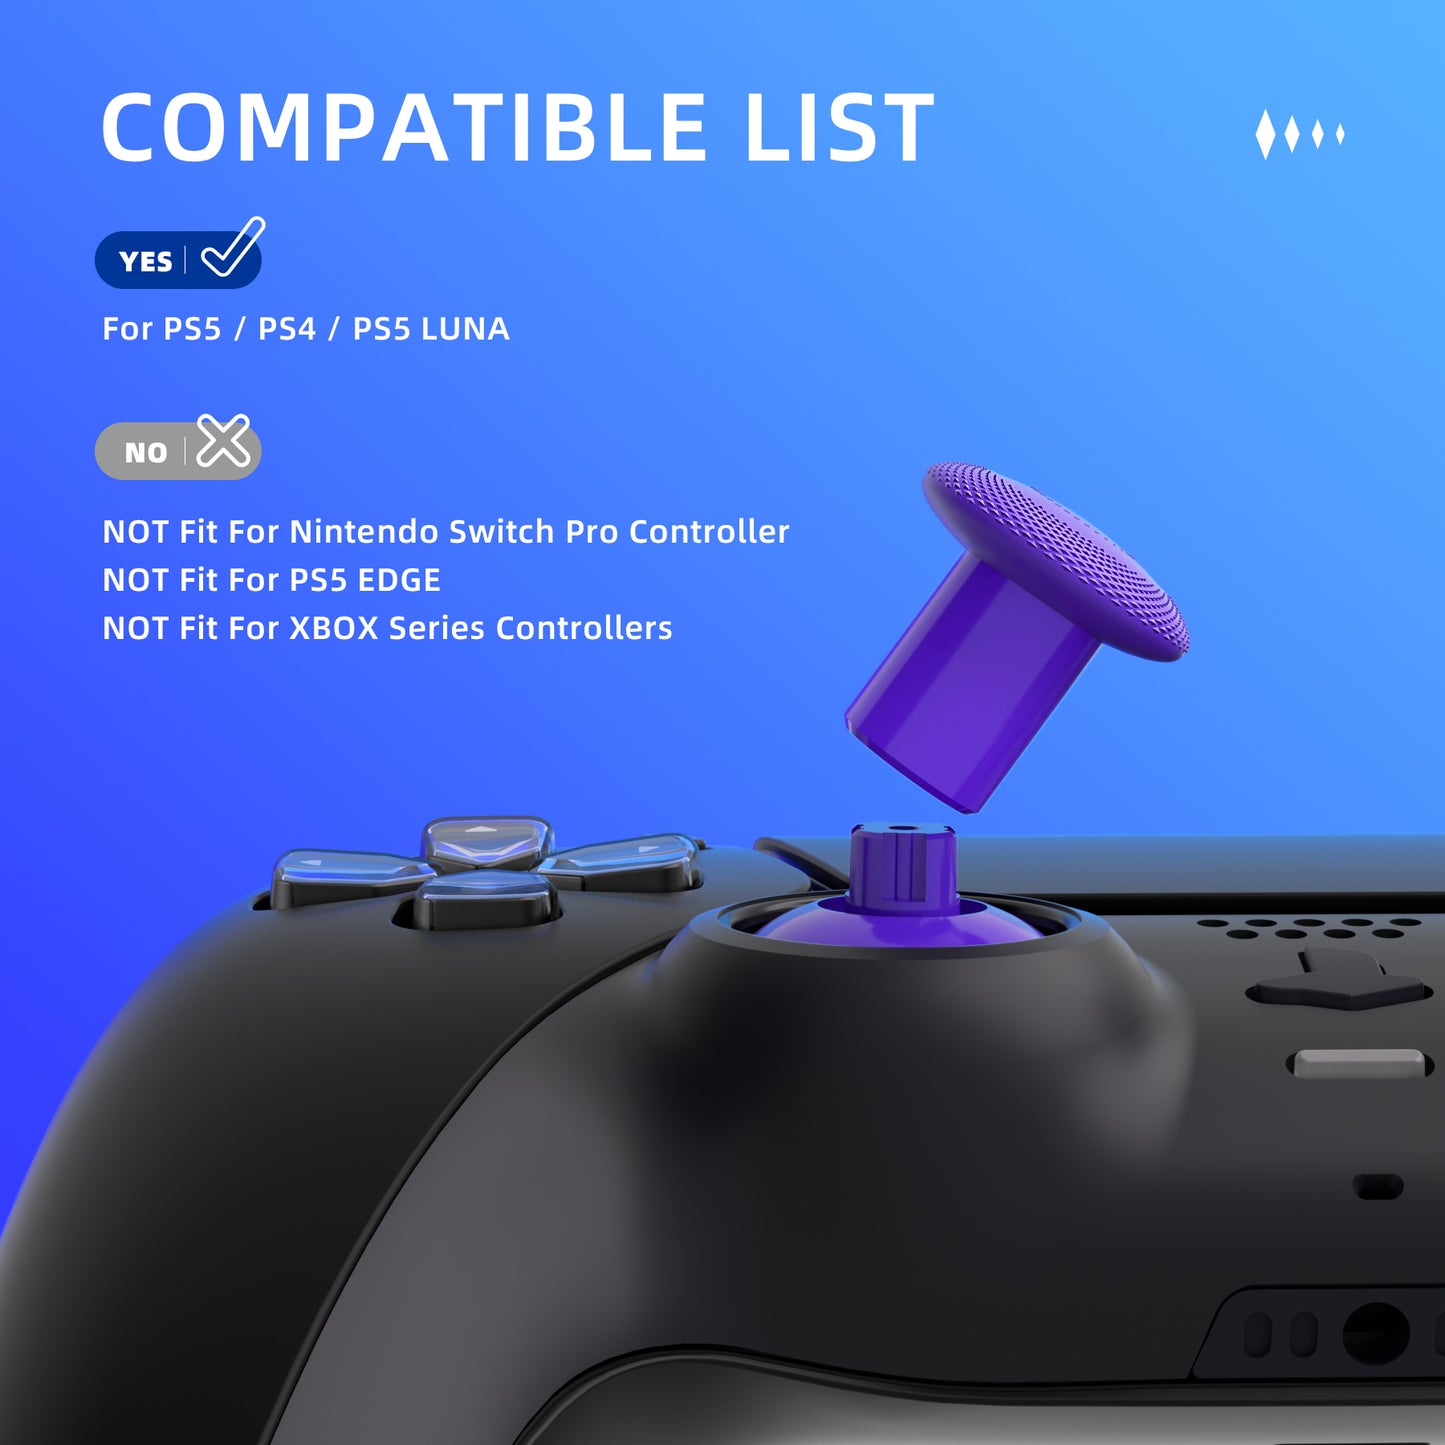 eXtremeRate ThumbsGear V2 Interchangeable Ergonomic Thumbstick with 3 Height Convex & Concave Grips Adjustable Joystick for PS5 & PS4 Controller - Purple eXtremeRate